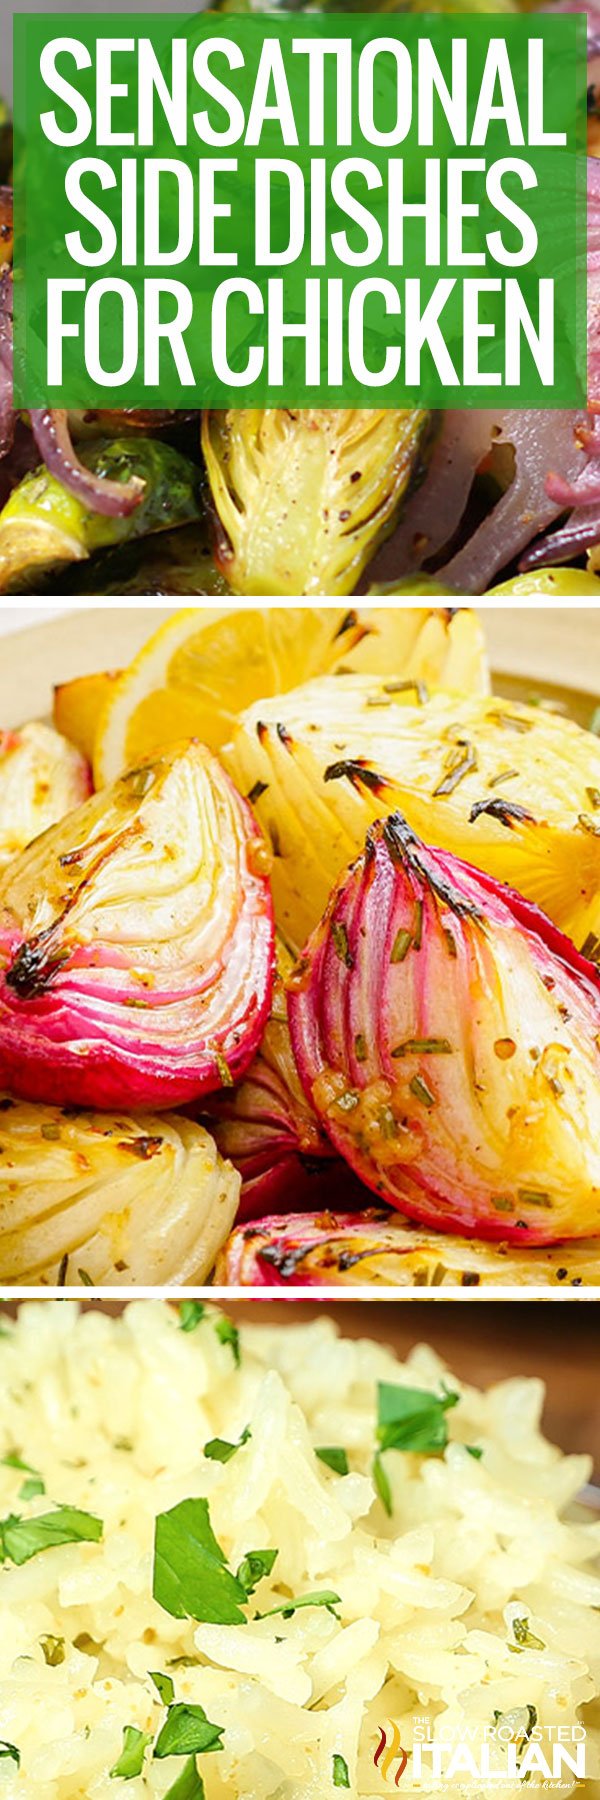 titled (roasted onion wedges shown close up) sensational side dishes for chicken